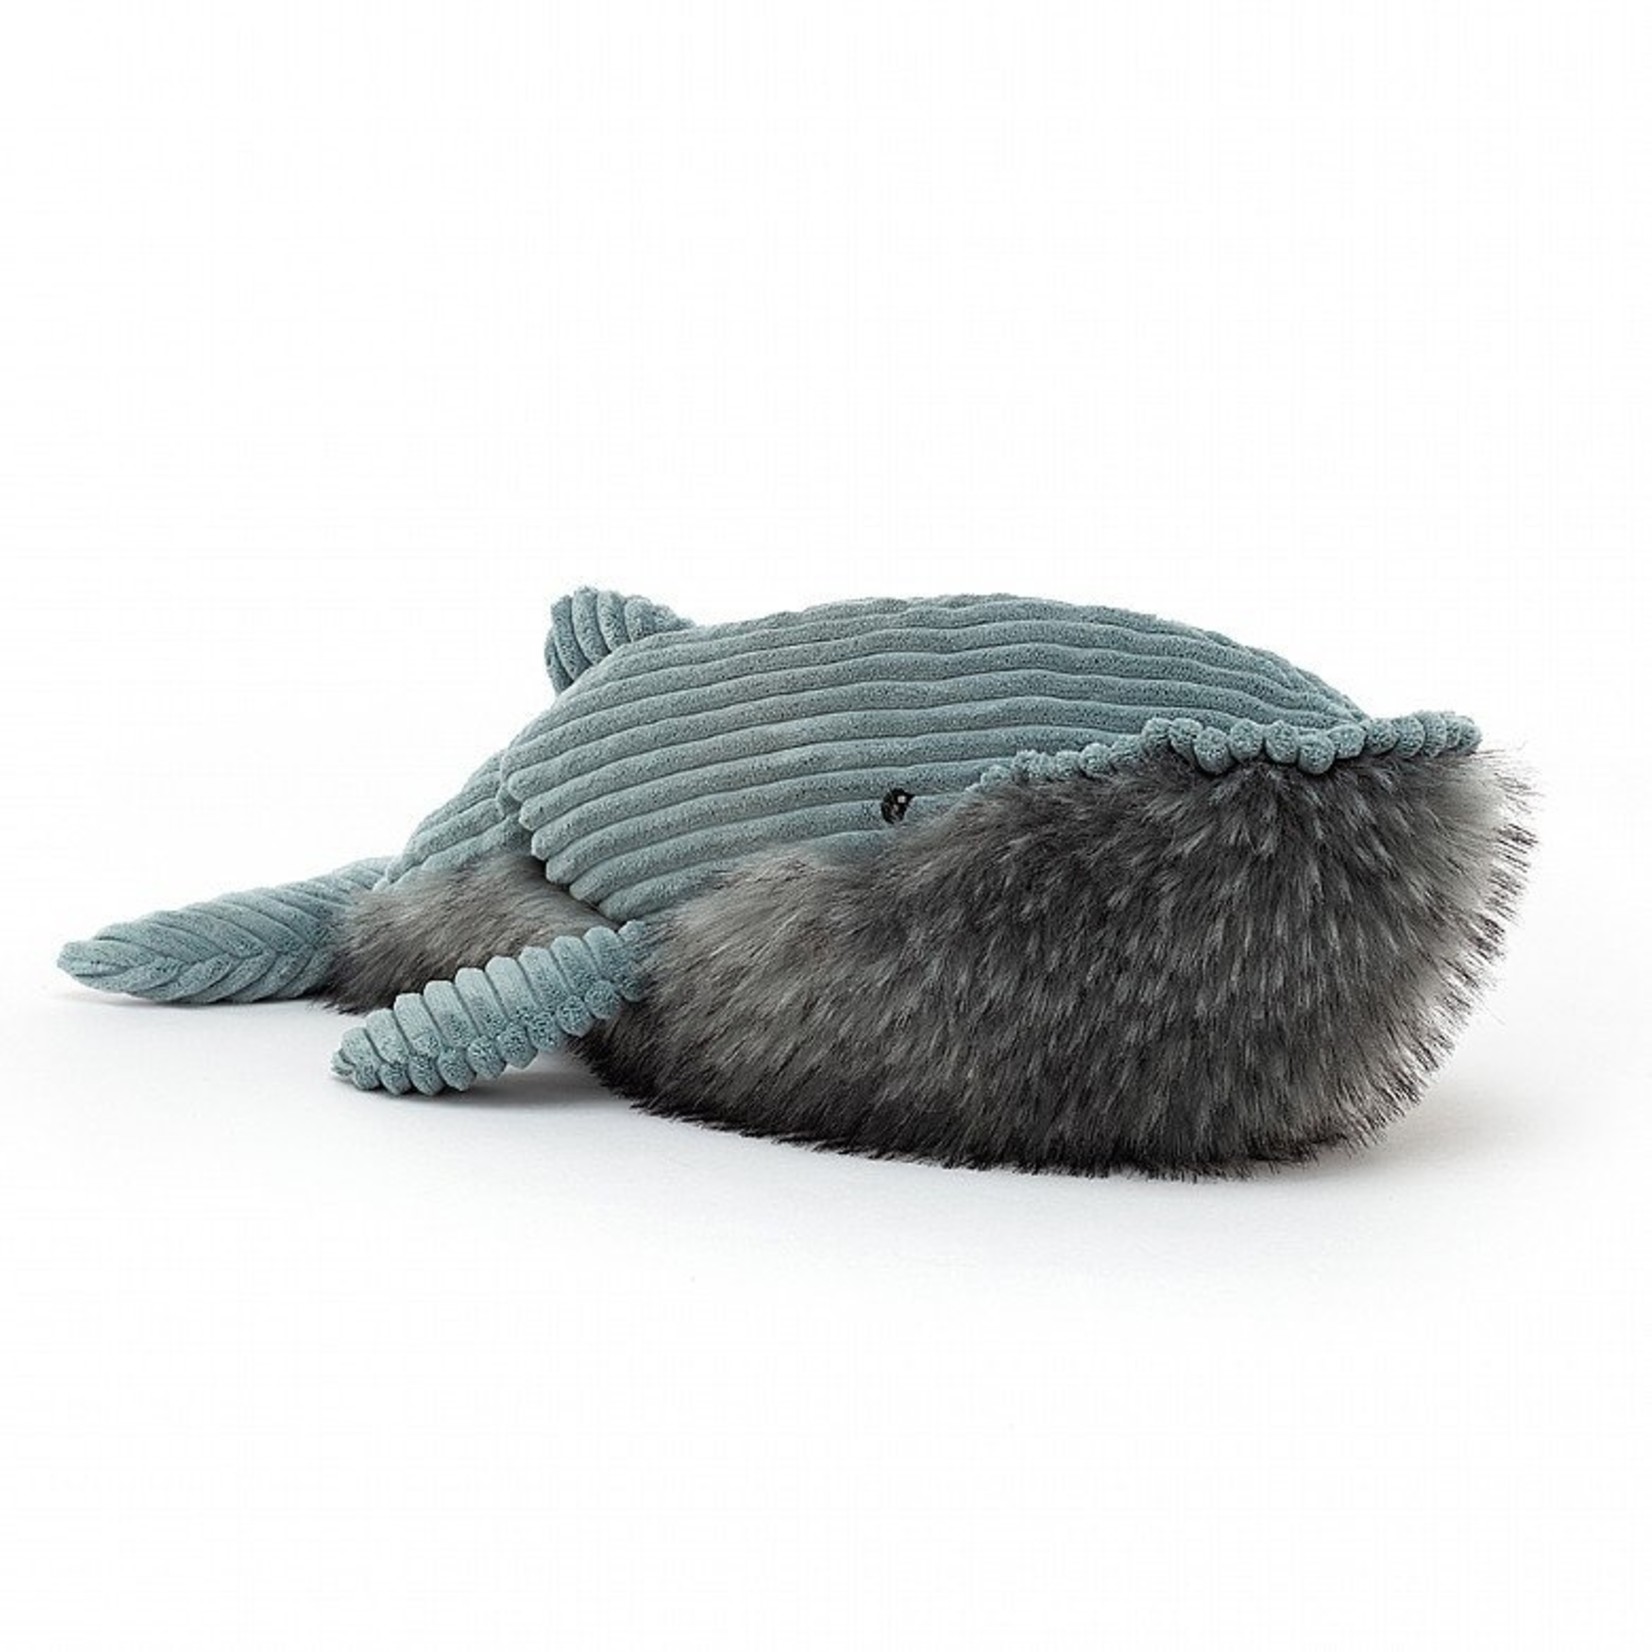 Jellycat Wiley Whale Large